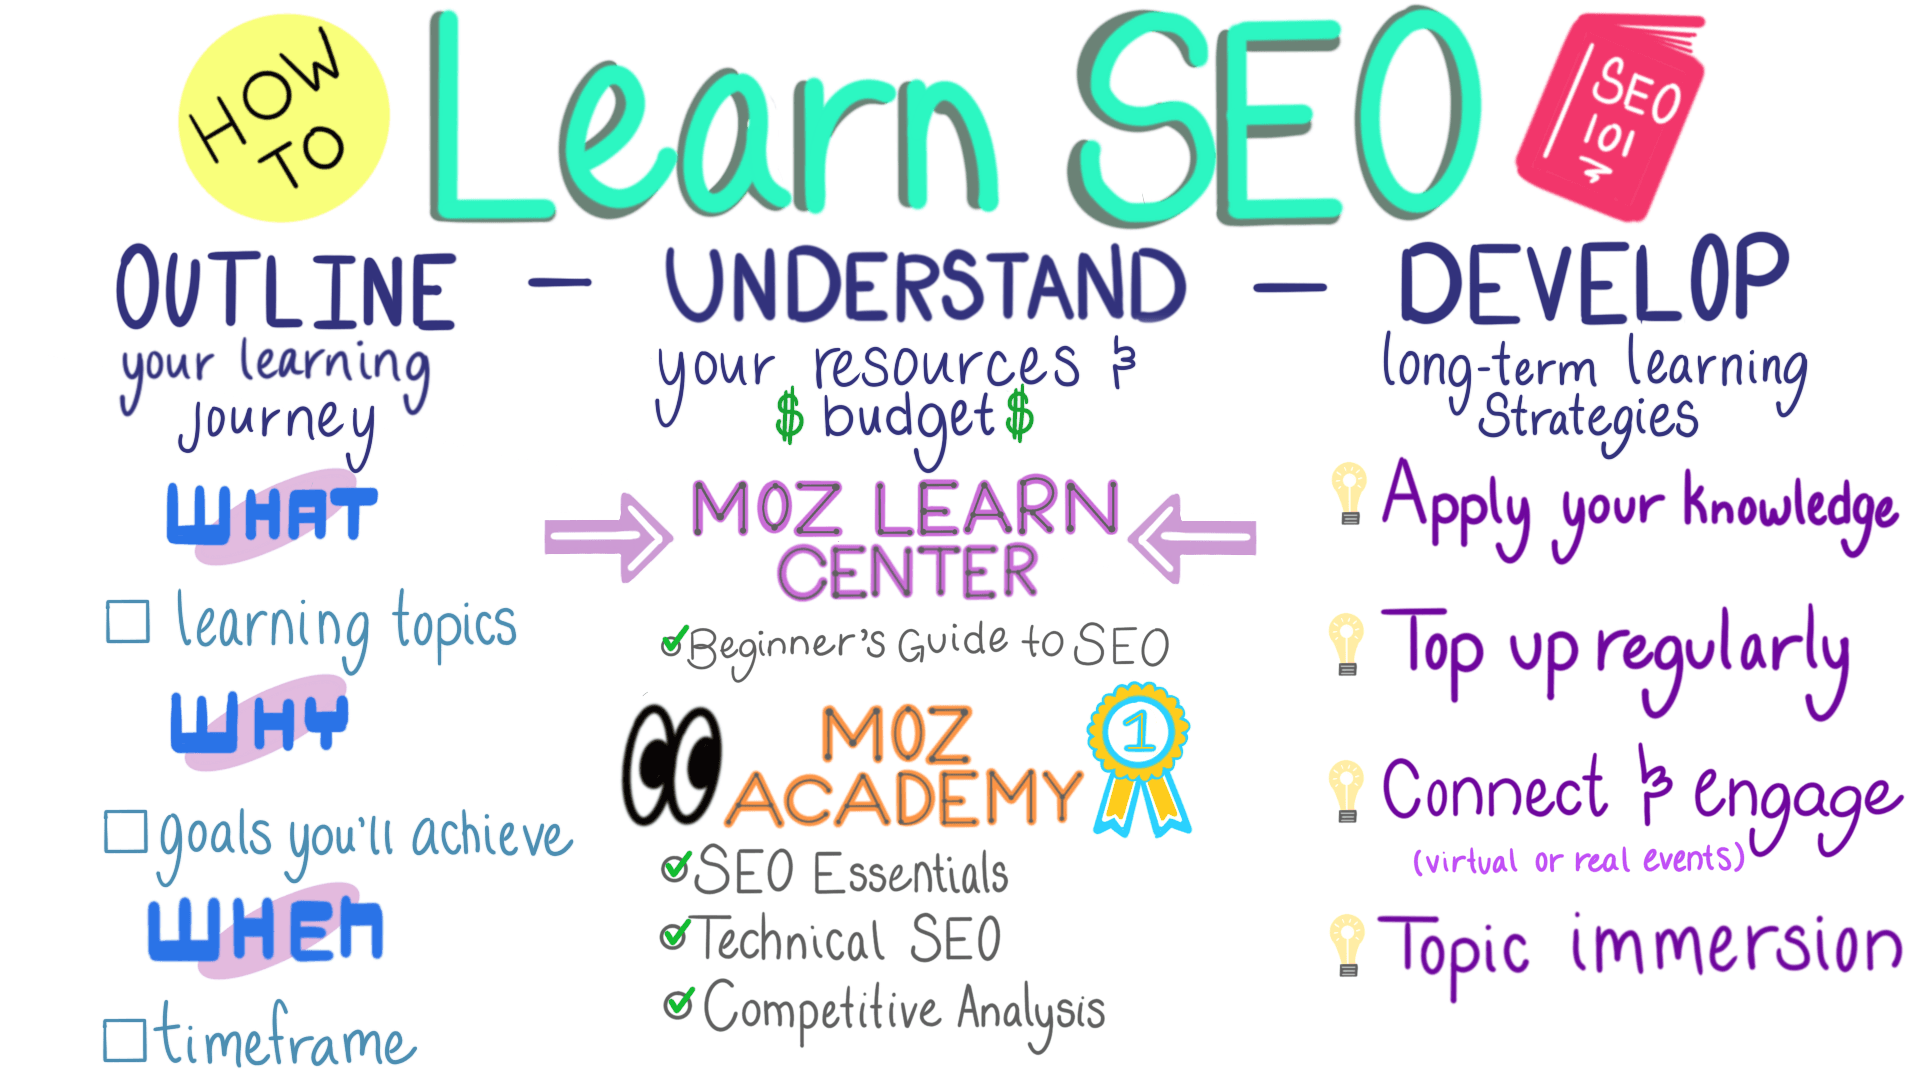 whiteboard with tips on how to learn SEO